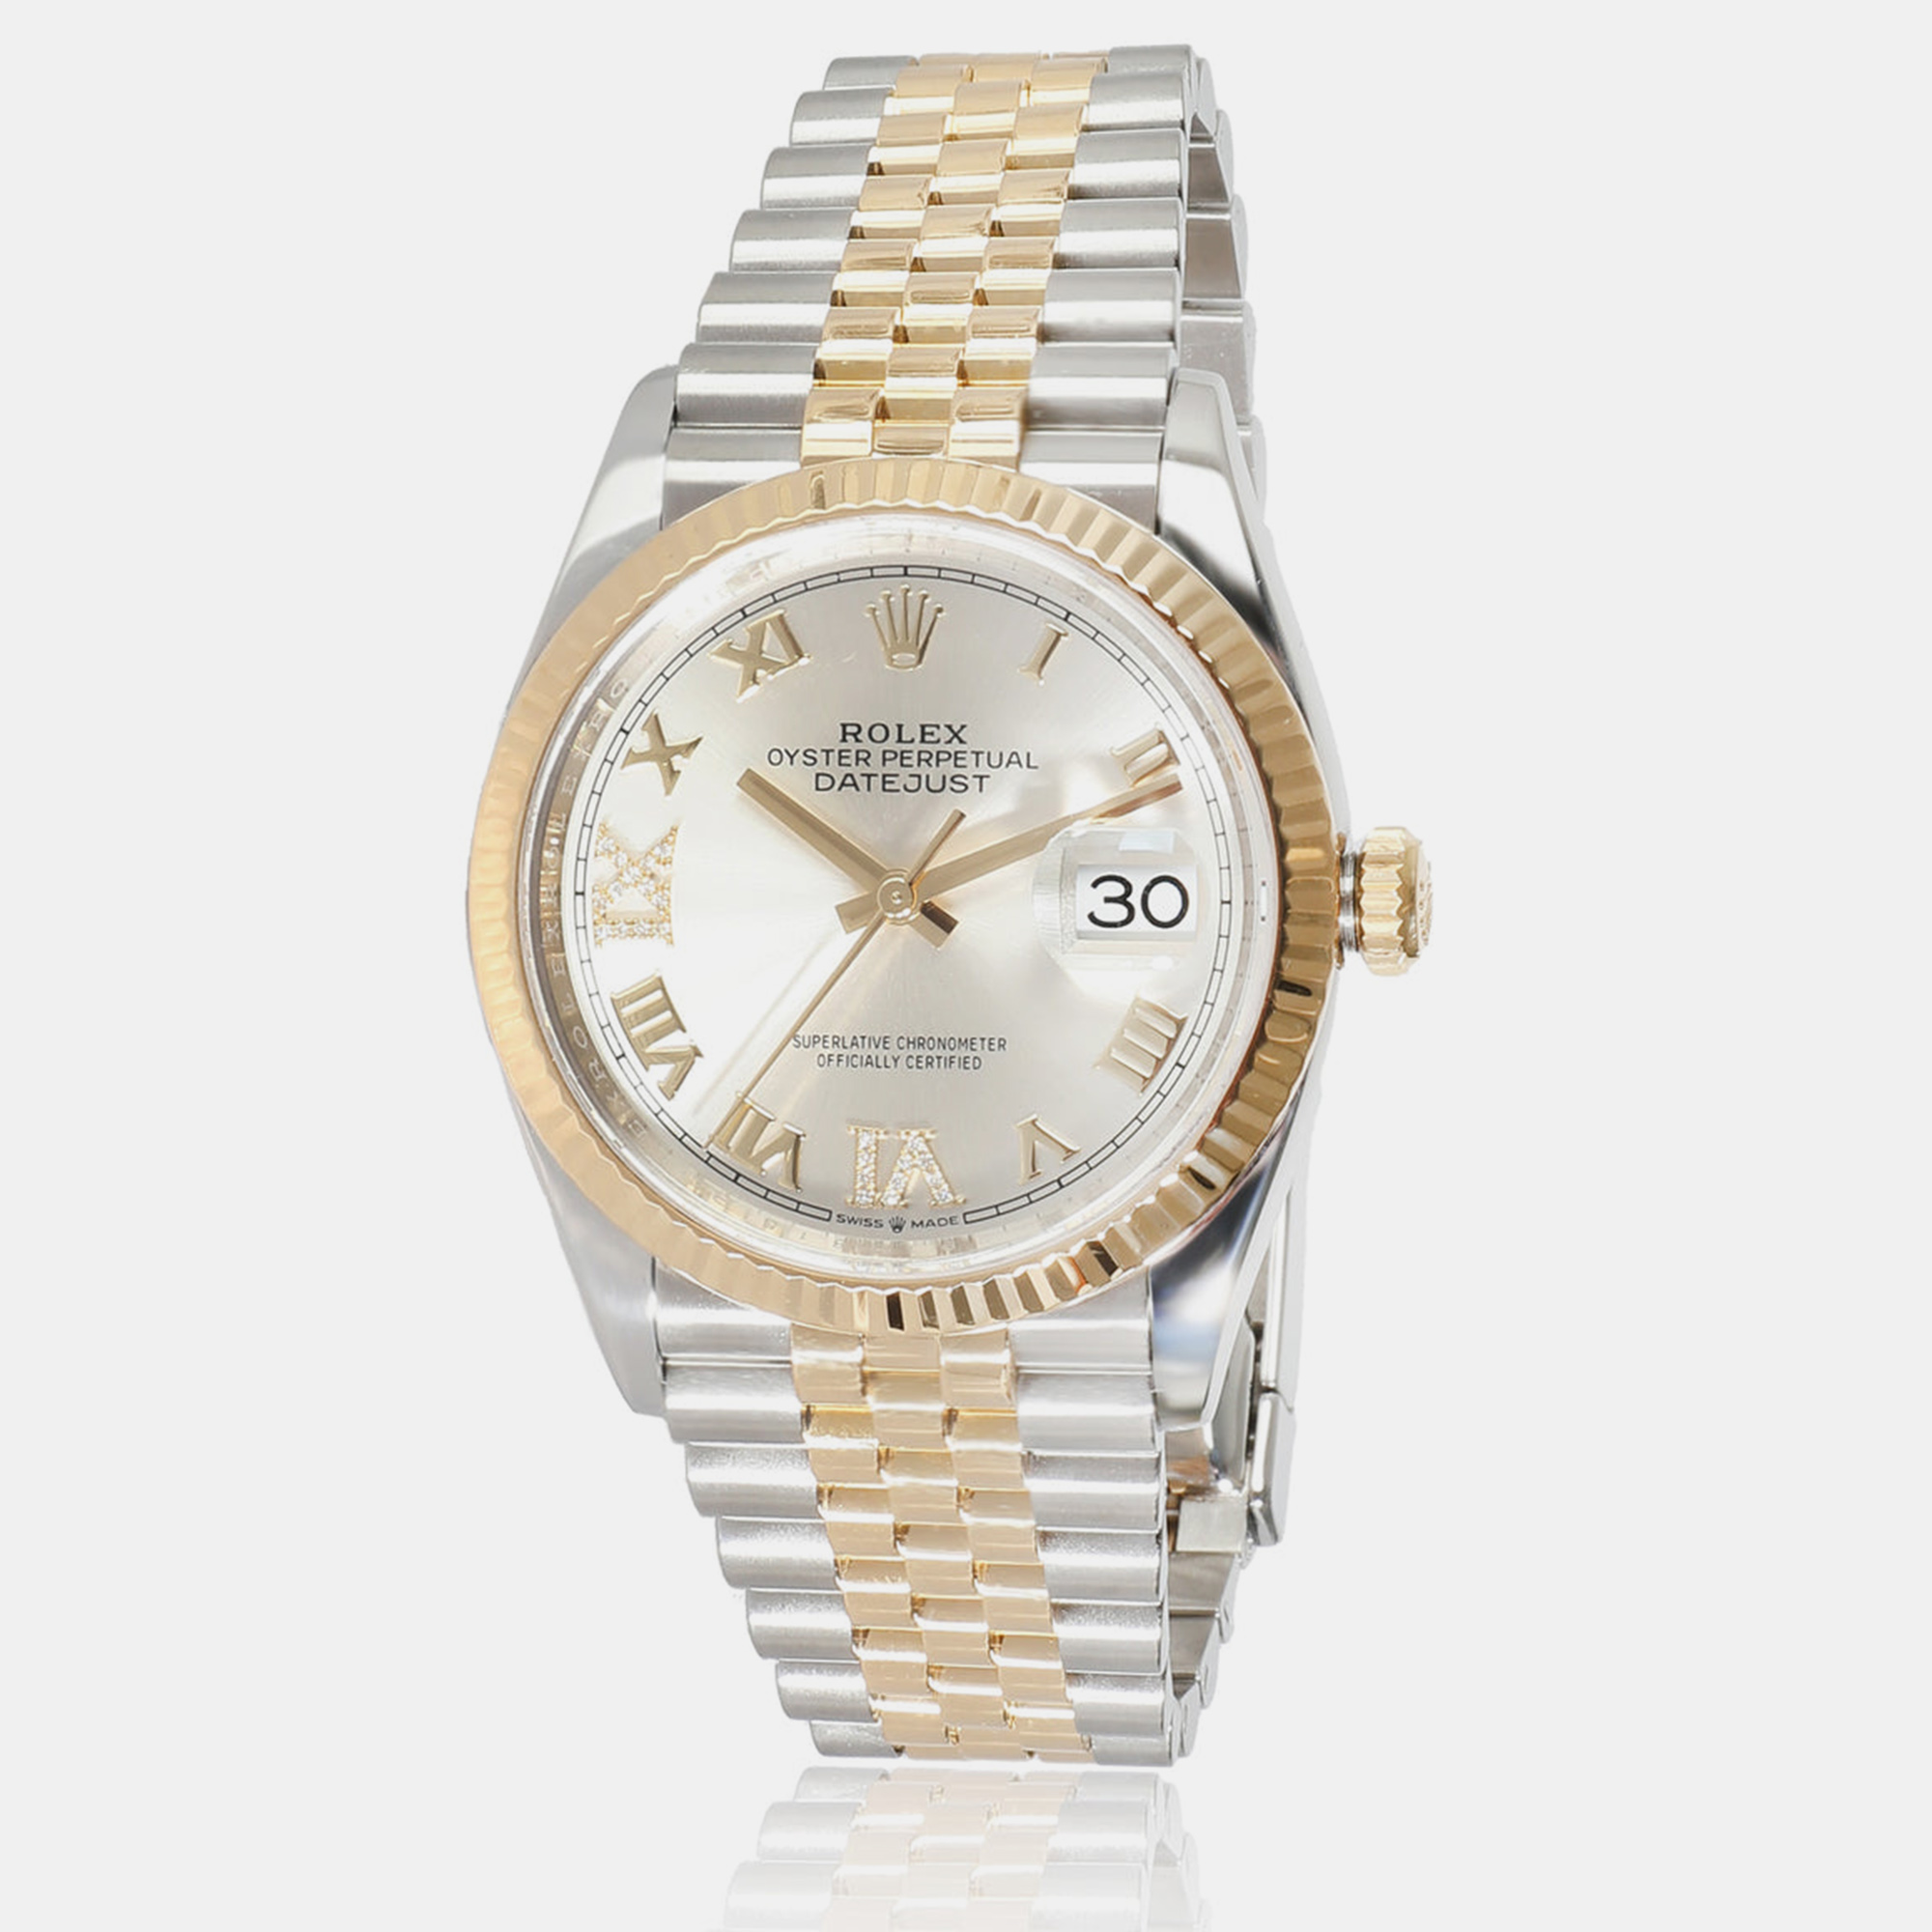 

Rolex Silver 18k Yellow Gold Stainless Steel Datejust 126233 Automatic Women's Wristwatch 36 mm